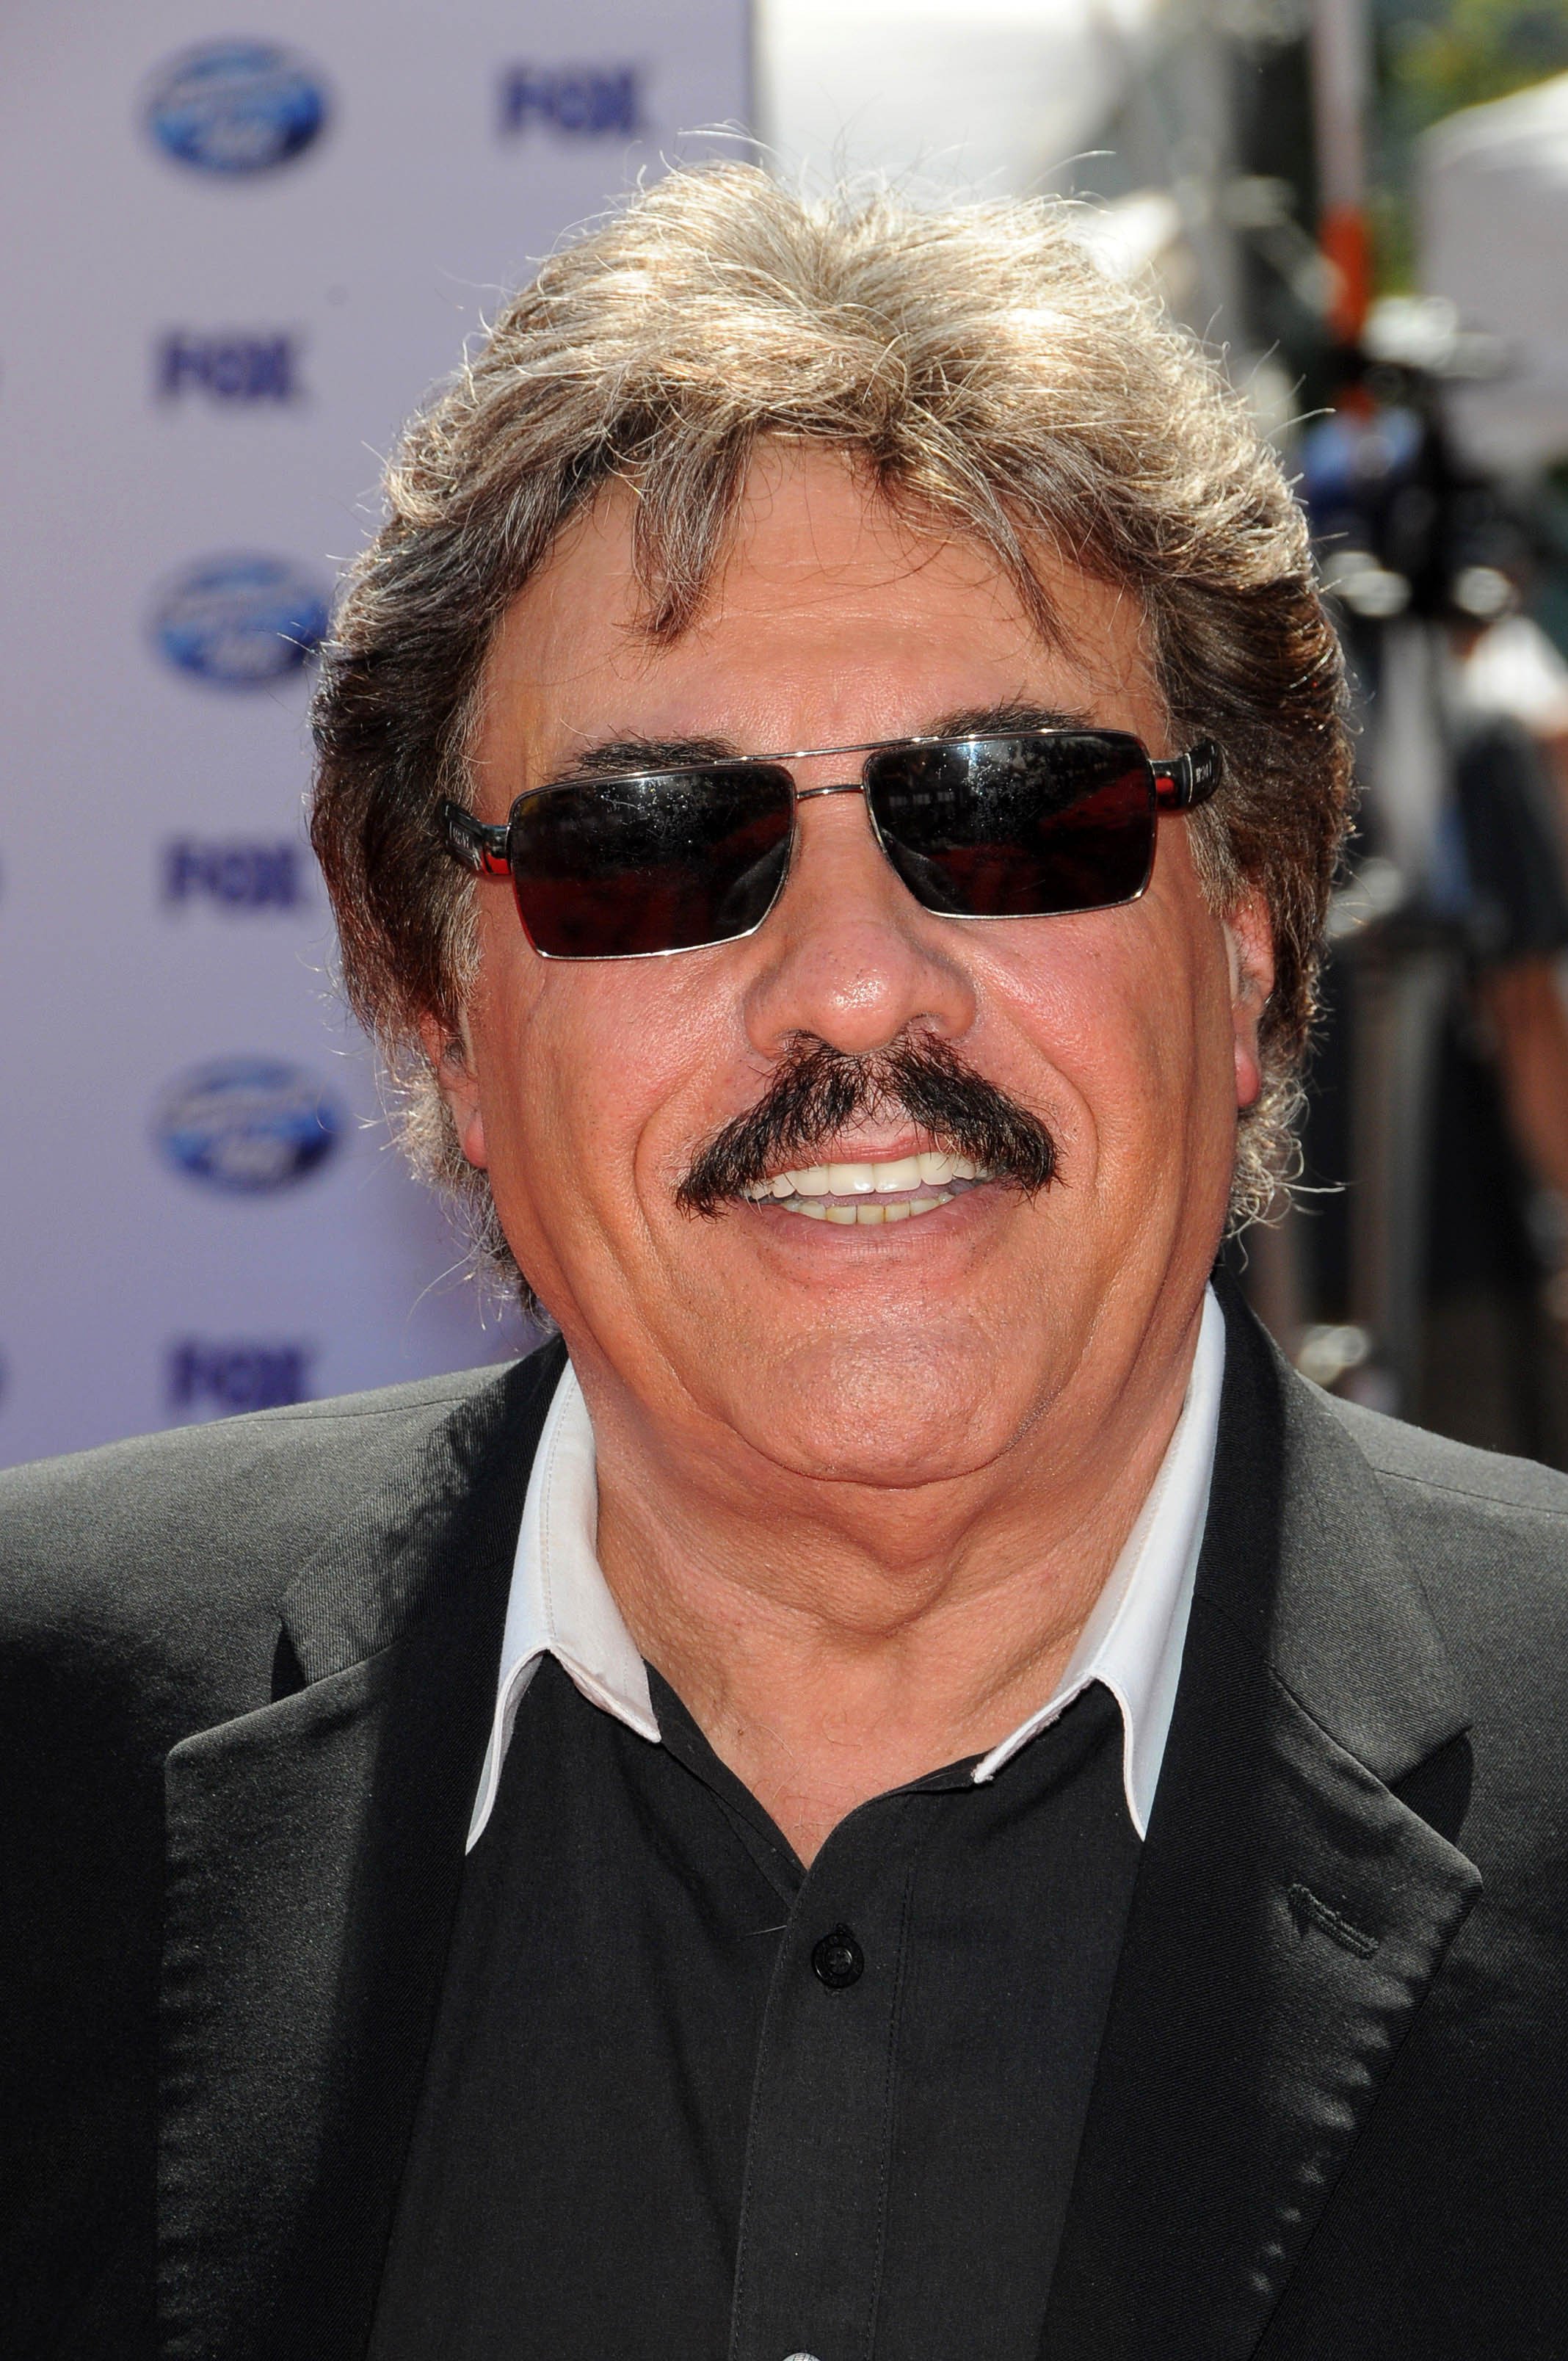 Tony Orlando at the American Idol Grand Finale 2010, Nokia Theater, on May 26, 2010, Los Angeles, California | Photo: Shutterstock